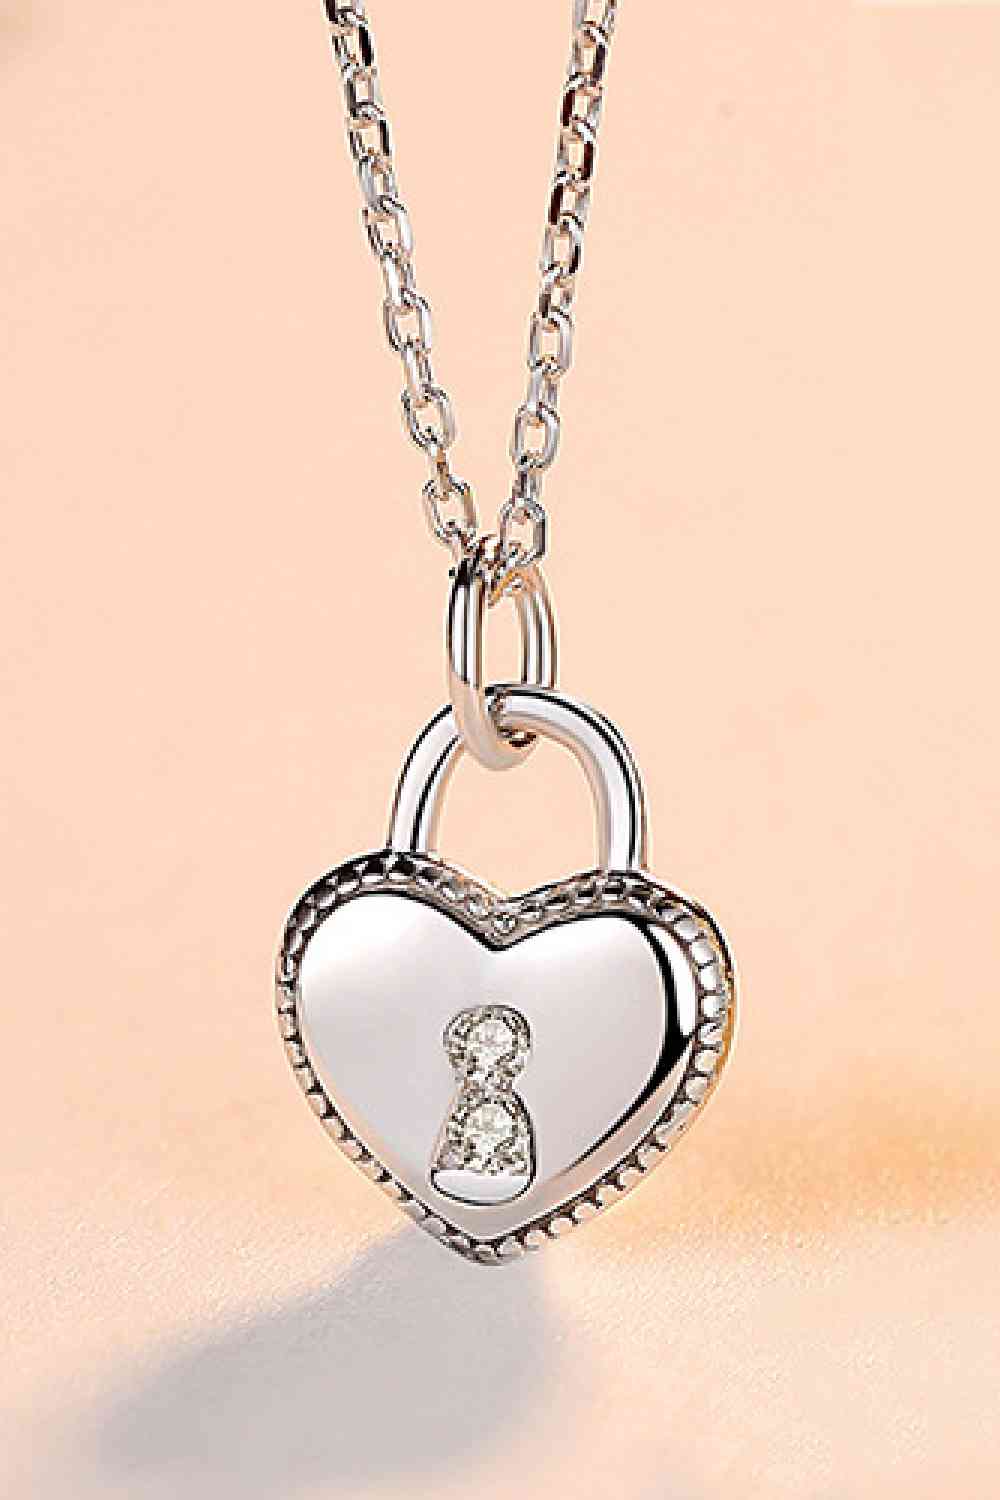 Heart Lock Pendant 925 Sterling Silver Necklace - Everyday-Sales.com